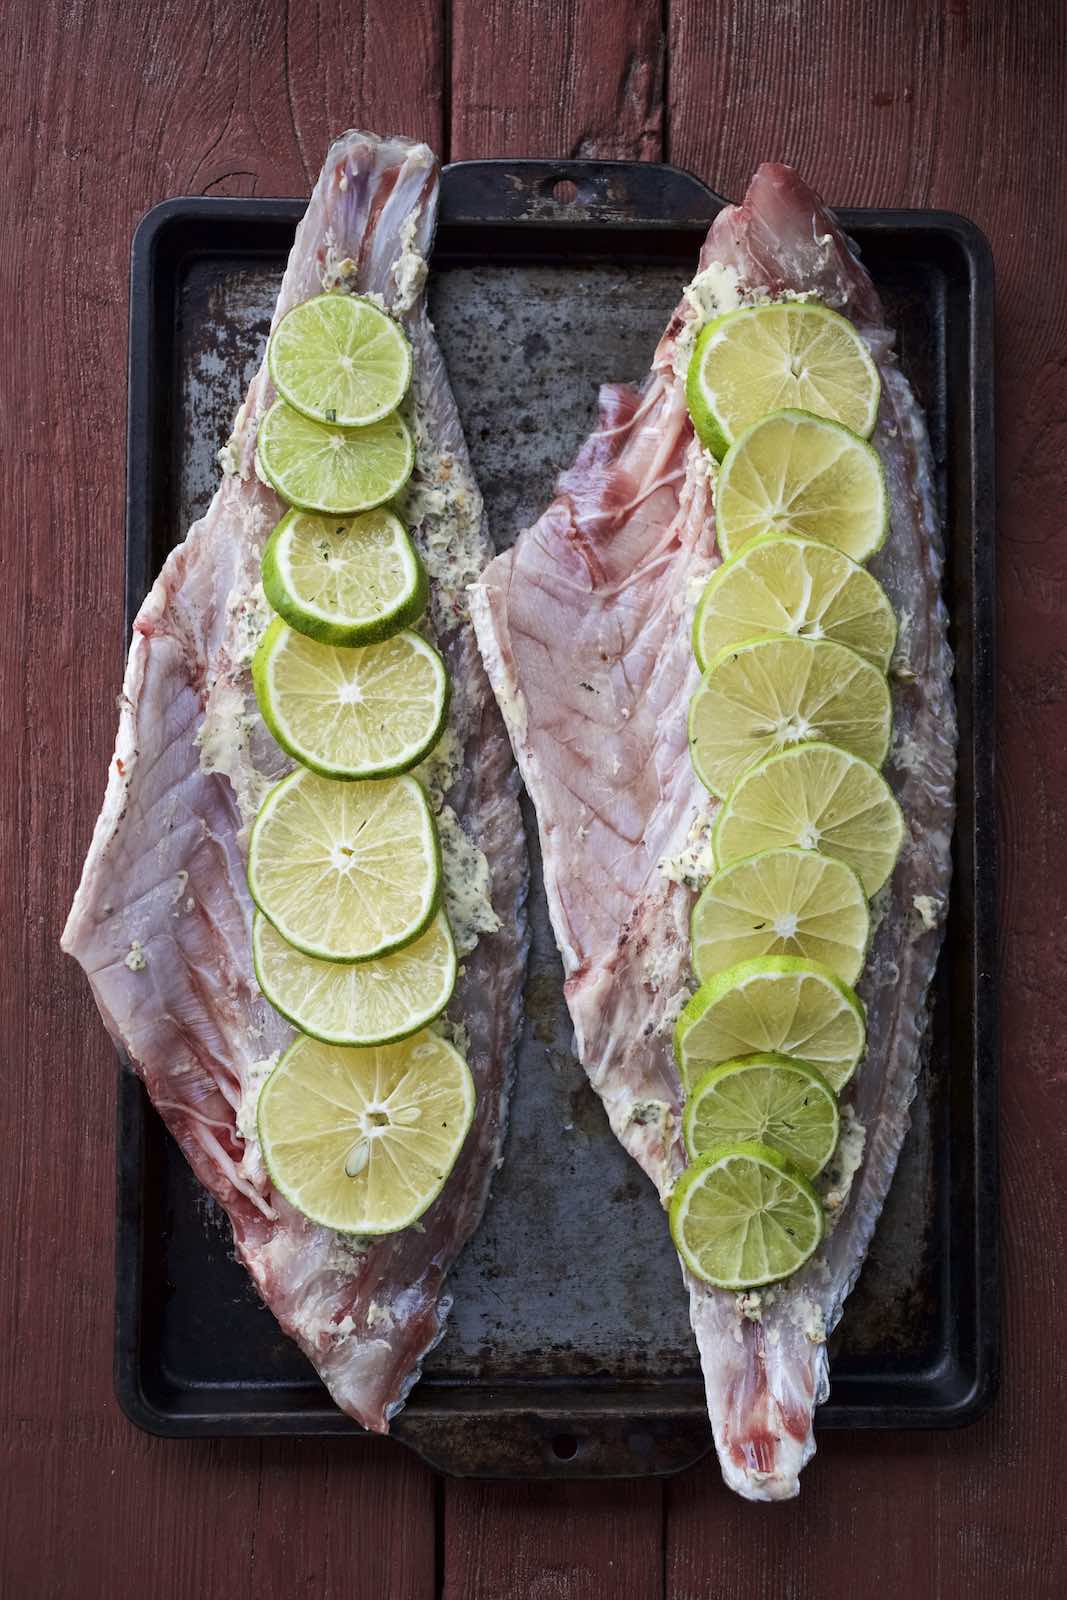 Jody Horton Photography - Large fish fillets with sliced limes on a metal tray.